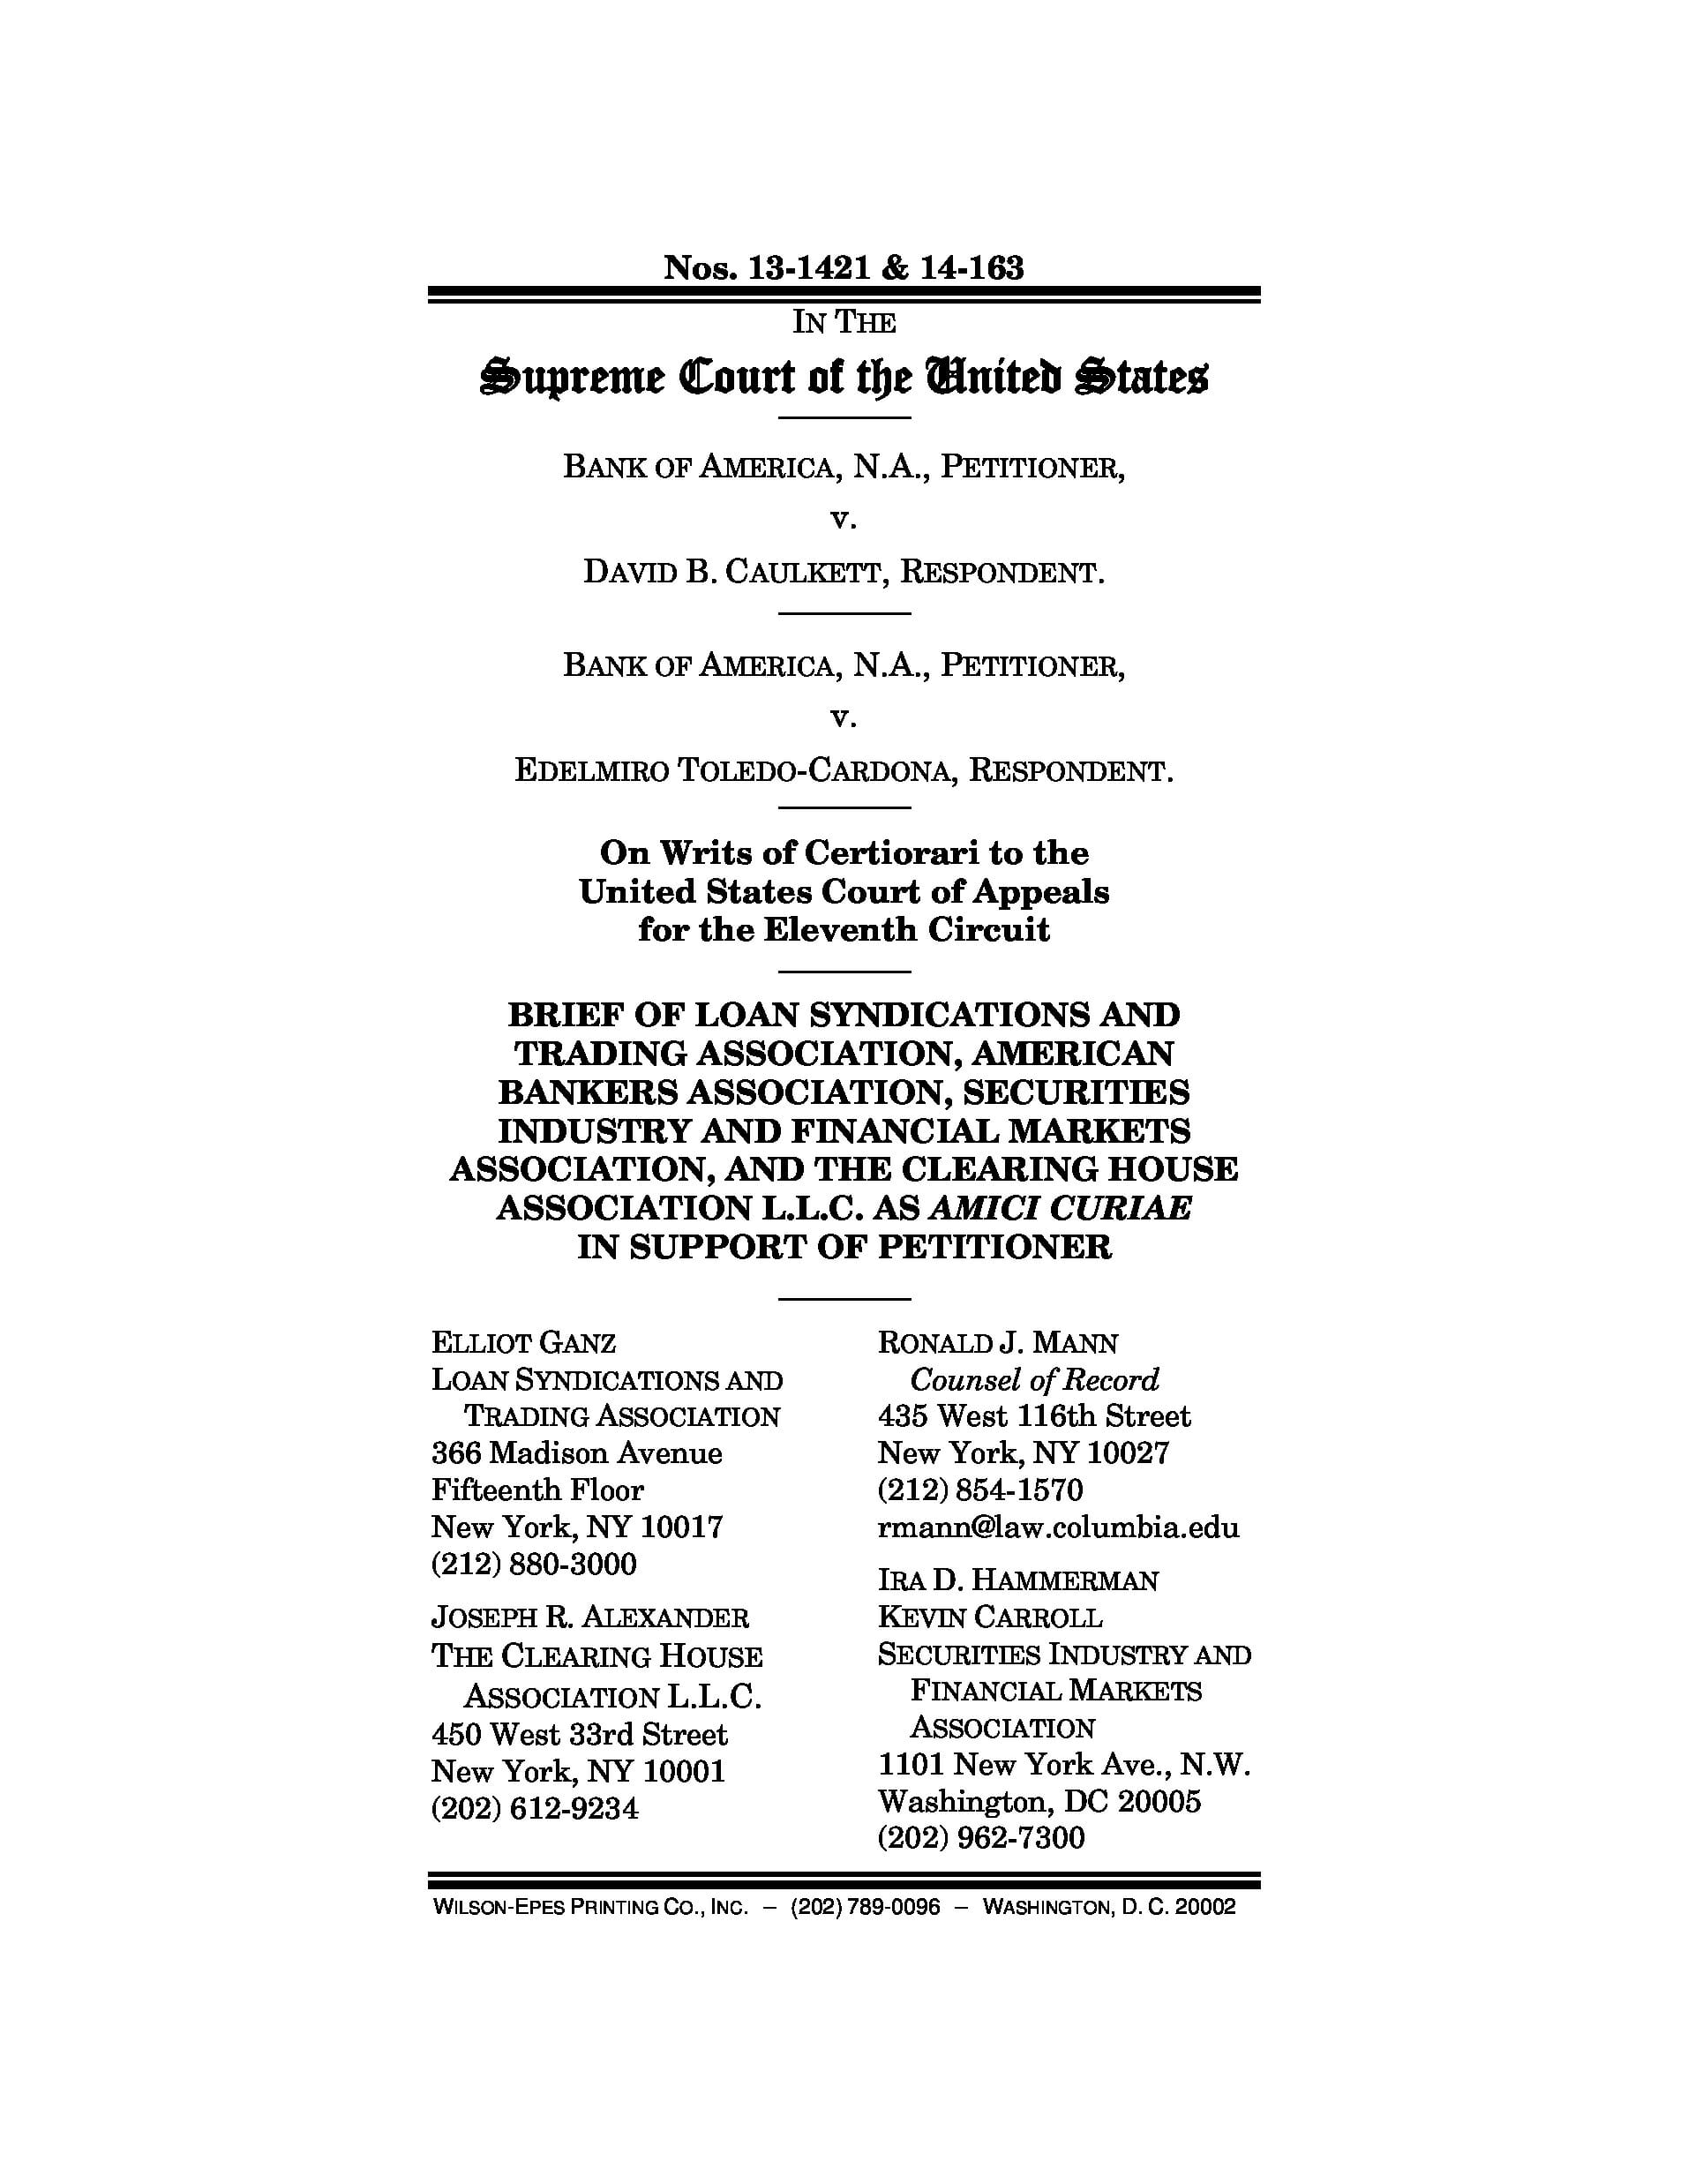 Lsta Files Amicus Brief With U S Supreme Court Over Holders Of Mortgages In Bankruptcy Lsta